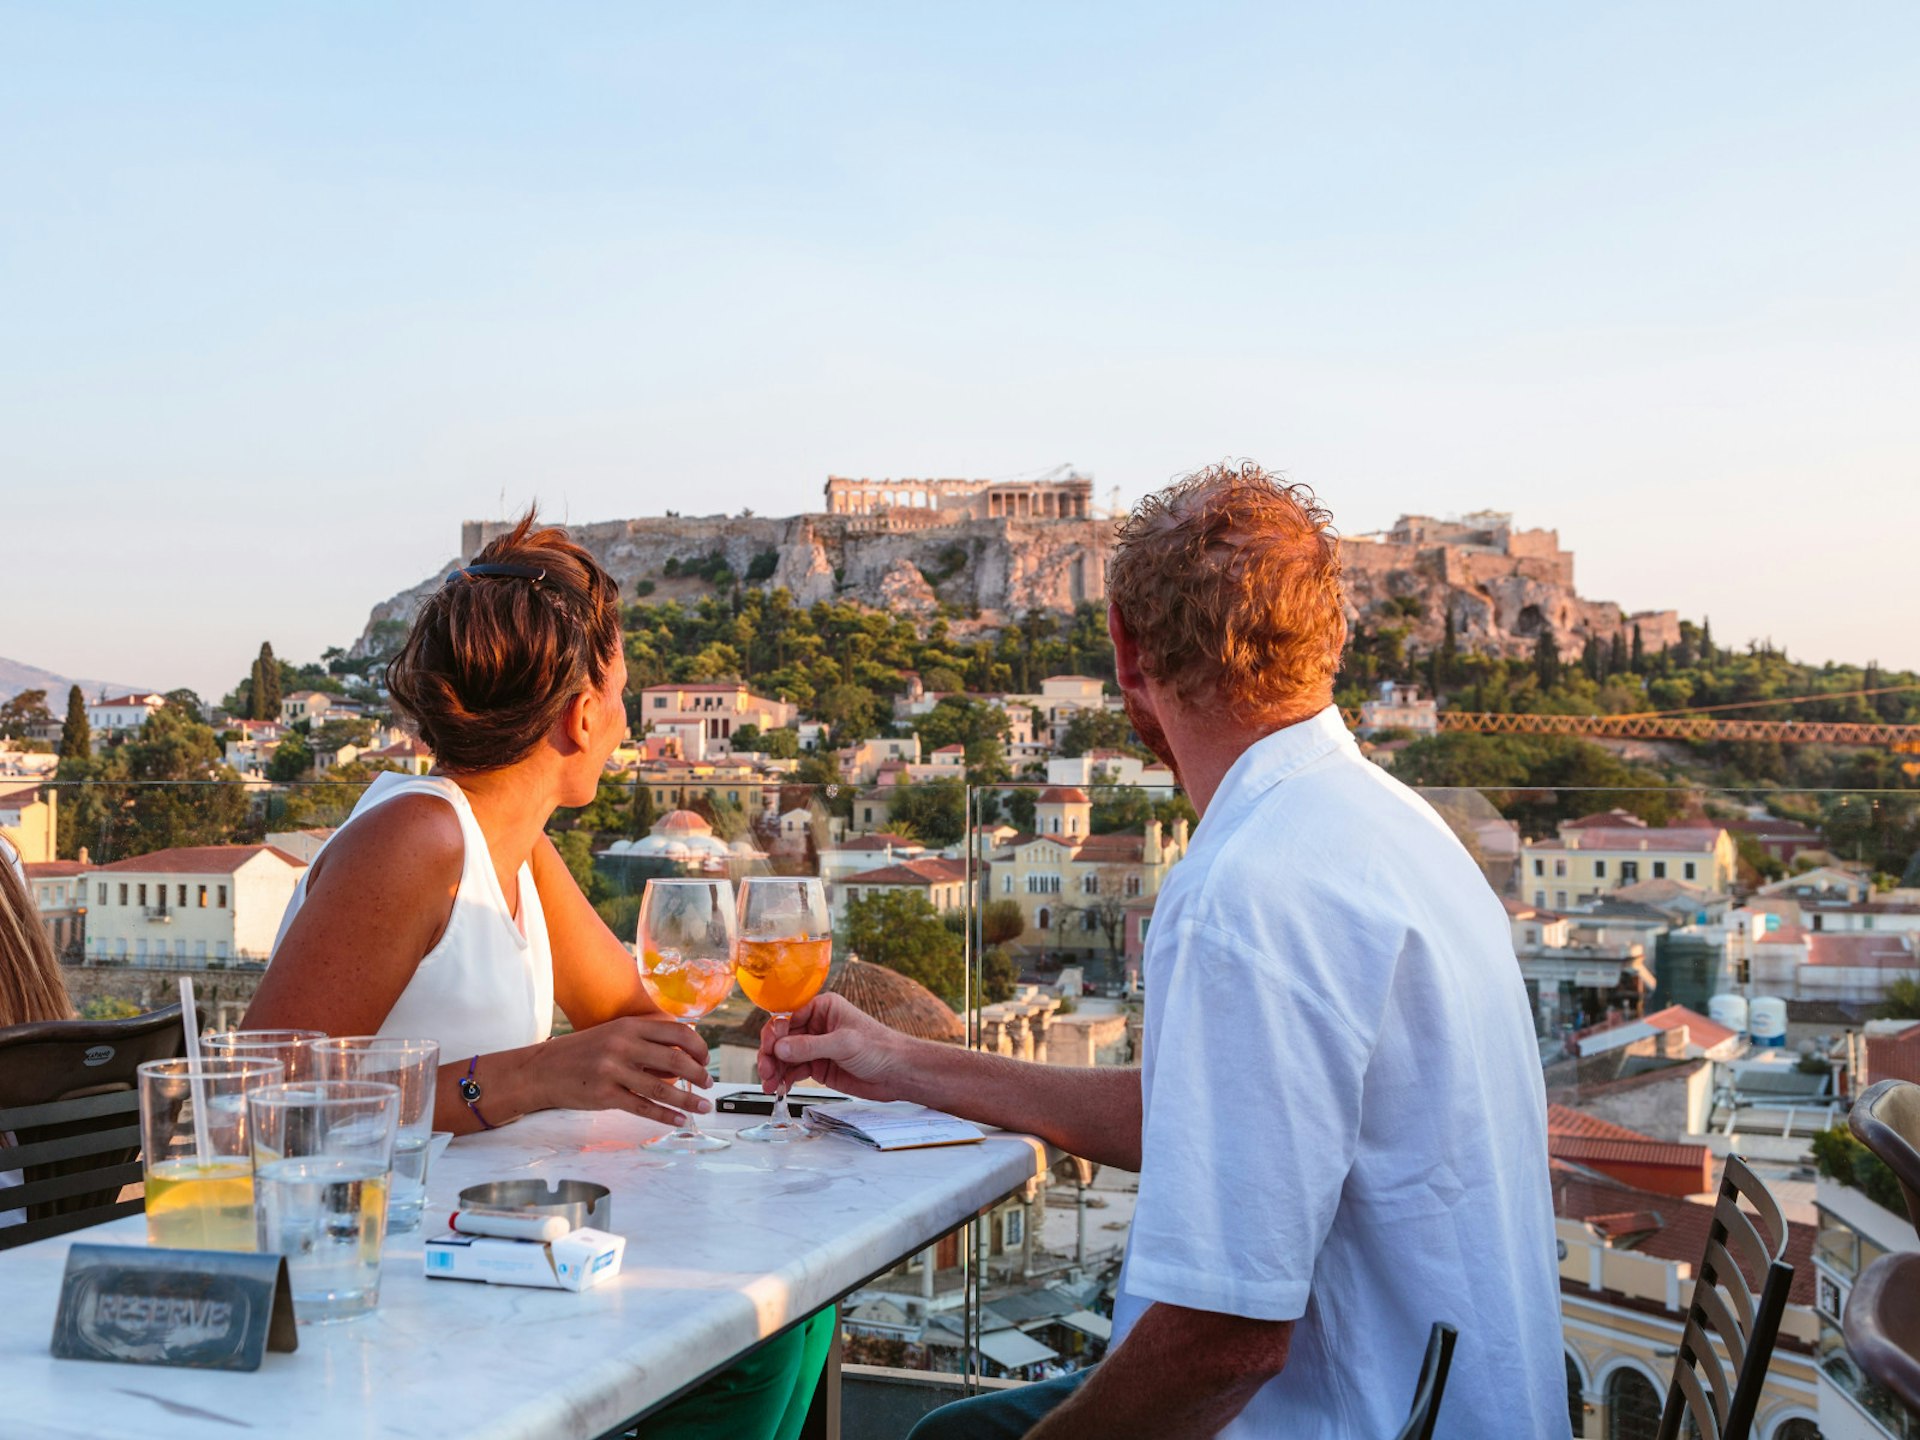 Sunset drinks with Acropolis views are the ultimate romantic Athens experience © Matteo Colombo / Getty Images